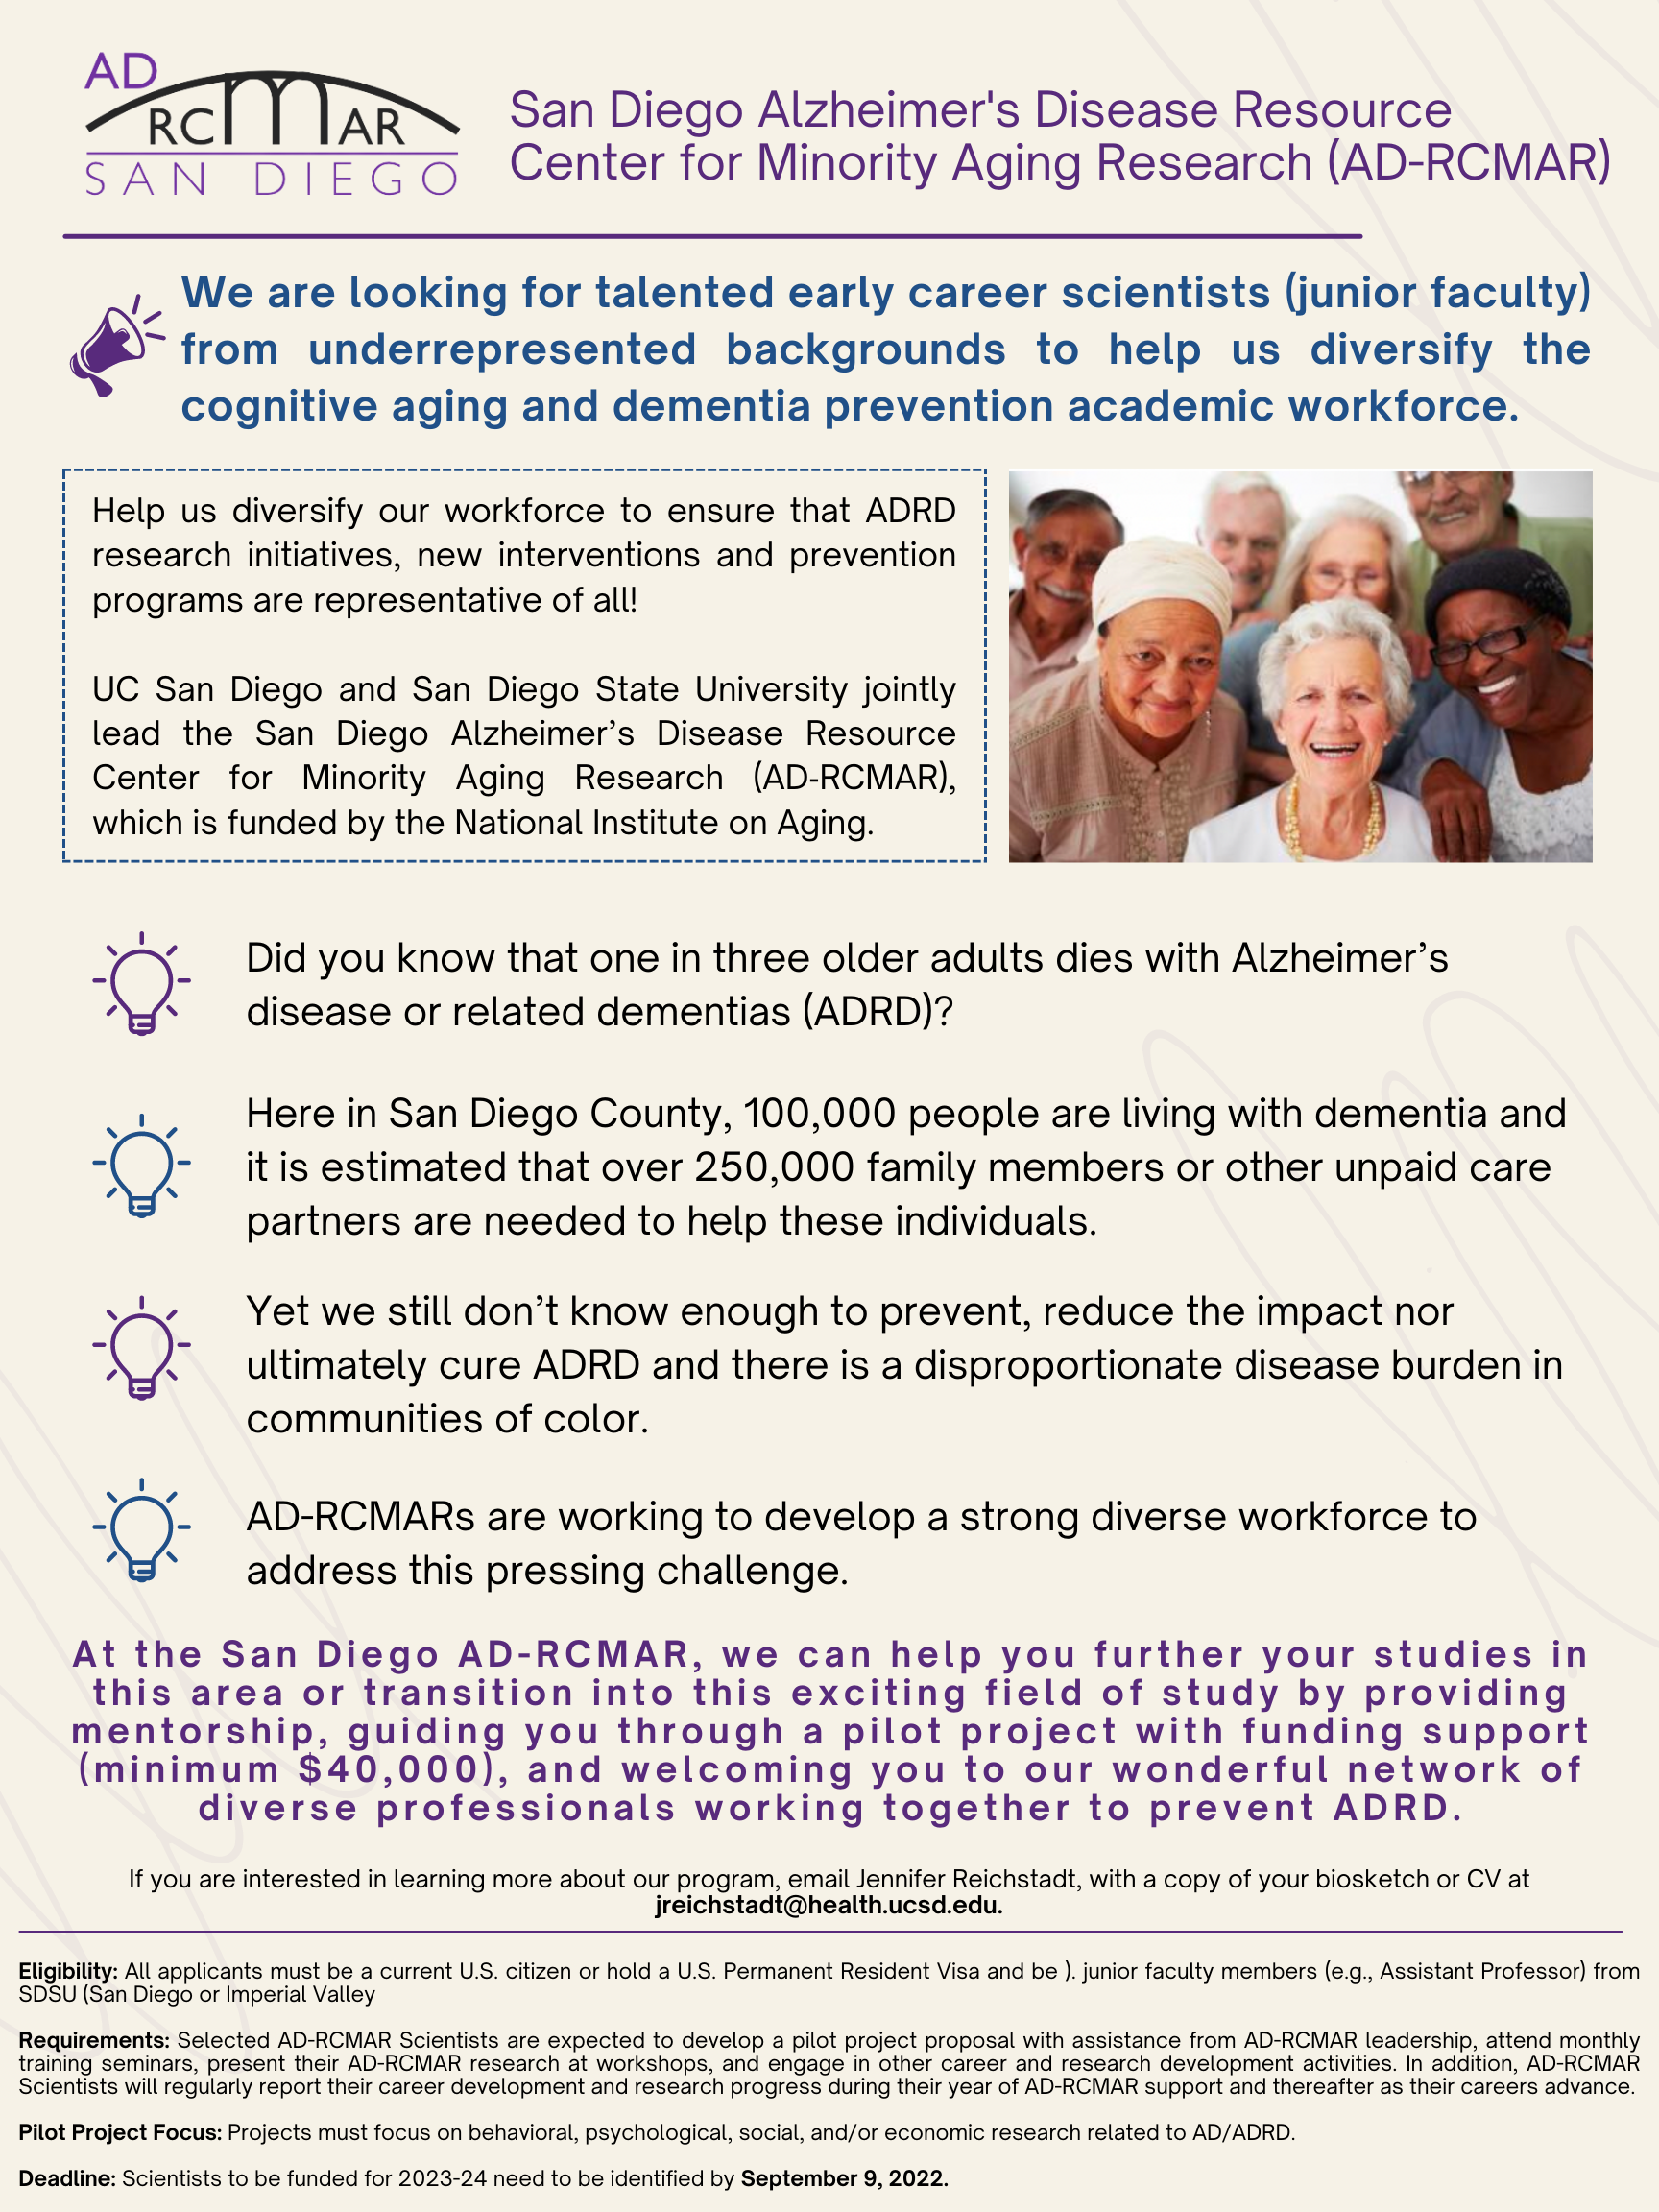 San-Diego-Alzheimers-Disease-Resource-Center-for-Minority-Aging-Research.png